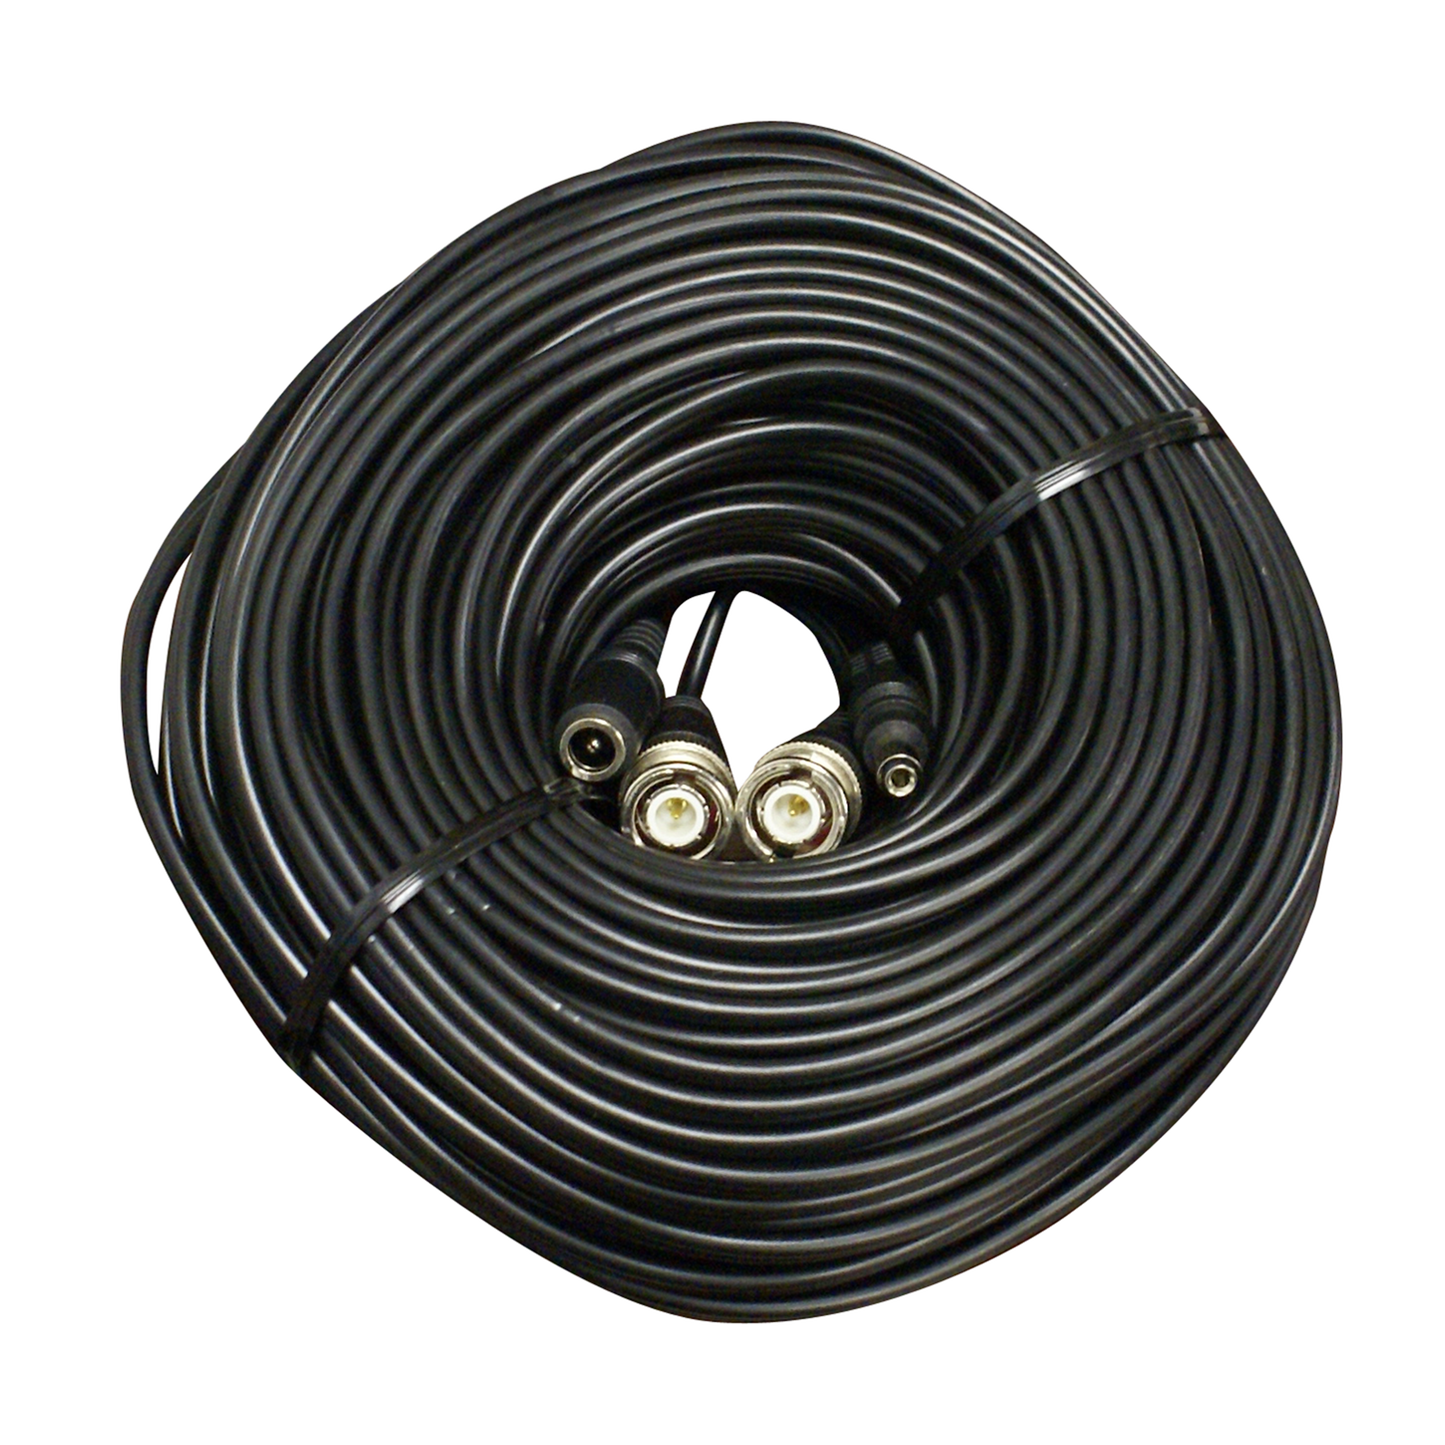 100′ Video/Power Extension Cable with BNC/BNC Connectors